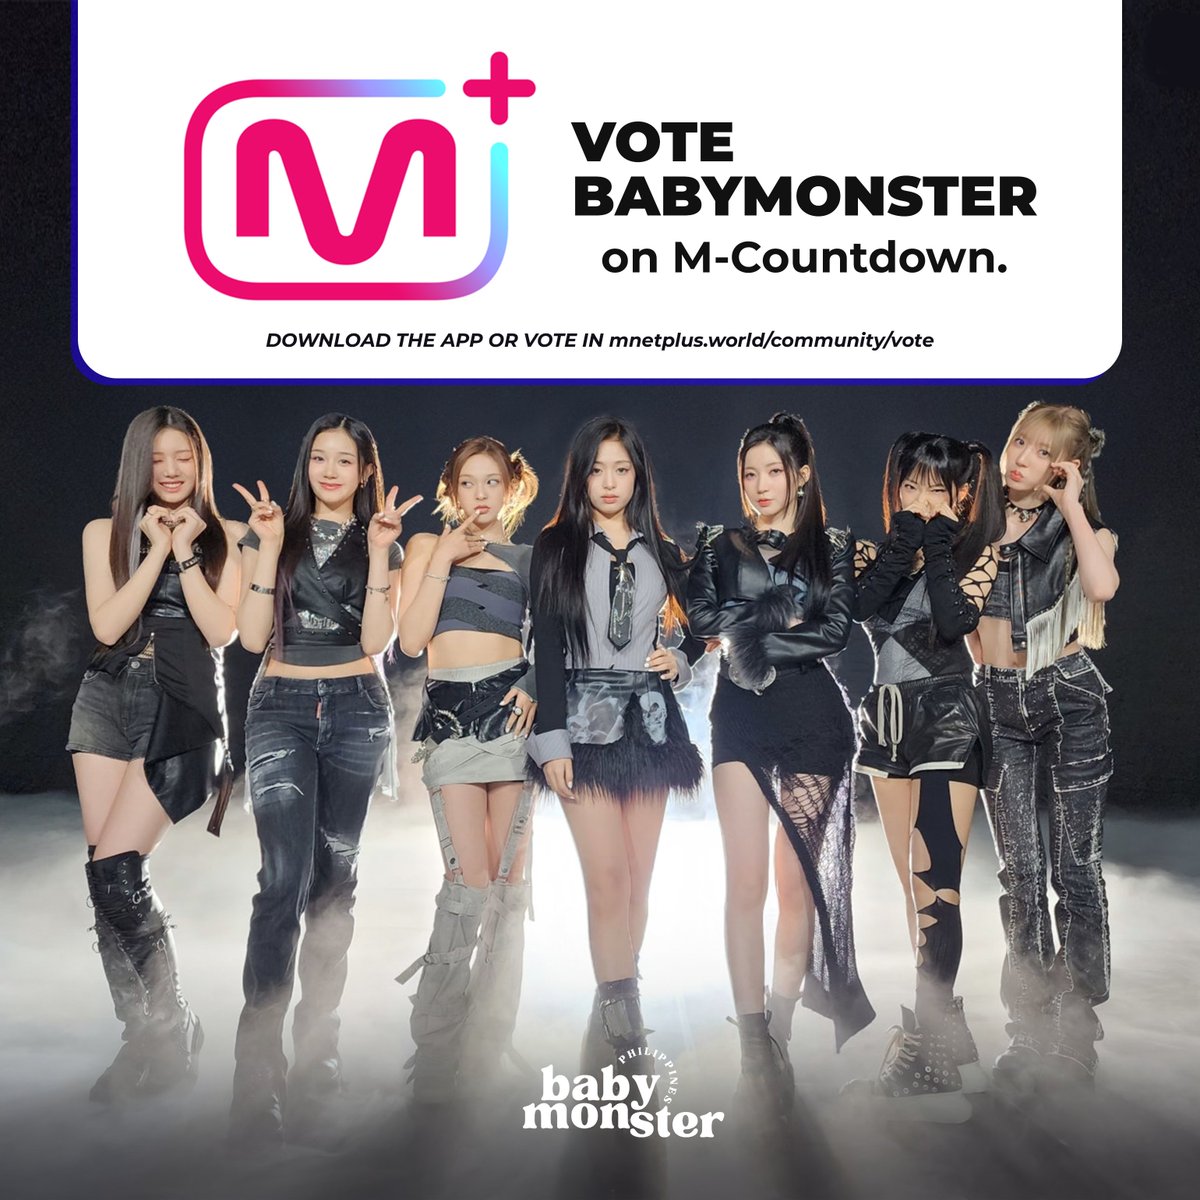 MGA DZAI! LET'S WIDEN THE GAP! [🚨] The PRE-VOTING period for M Countdown has now started! Since voters may no longer be able to vote more than once on one device, we encourage ALL BAEMONVILLE TO PARTICIPATE IN VOTING. 📆 Deadline: April 15th, 11:59PM KST 📌 1 vote per…